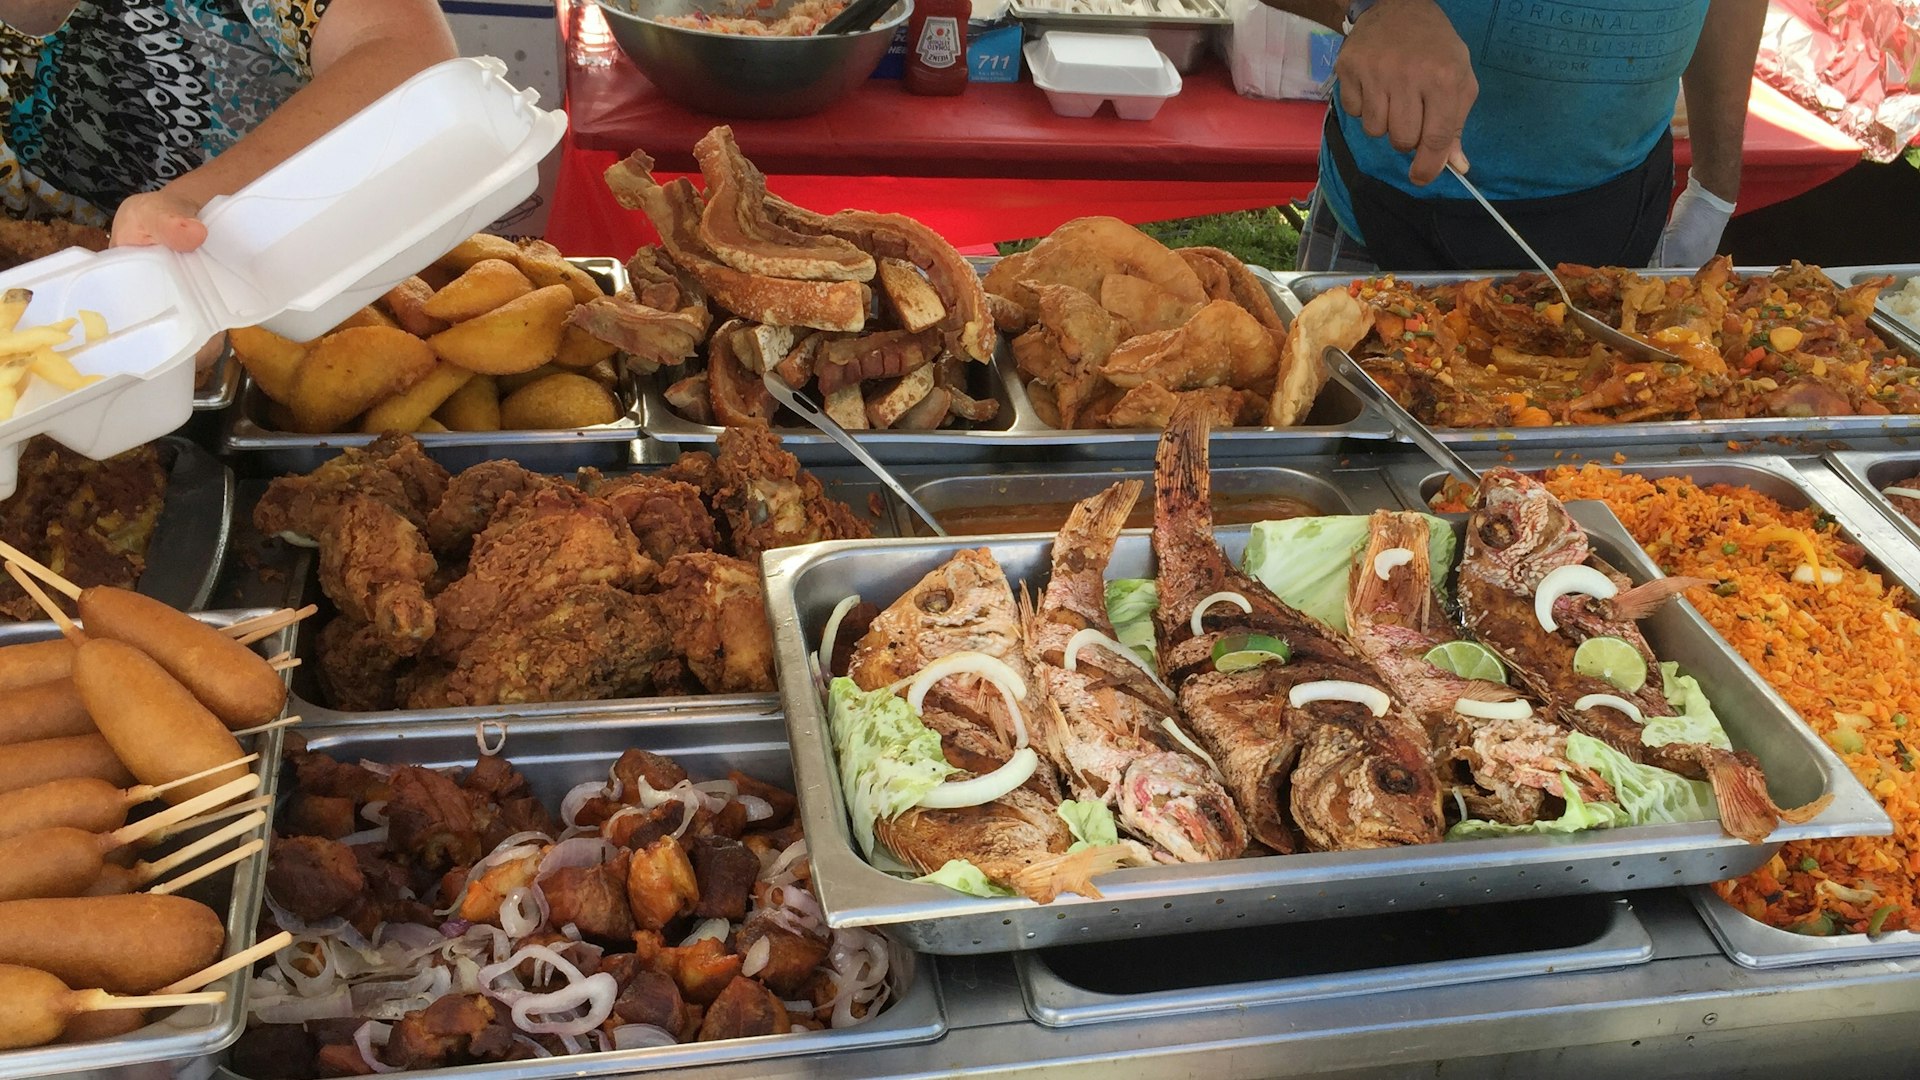 A street-food stand has many metal containers filled with different Latin foods such and empanadas and rice dishes